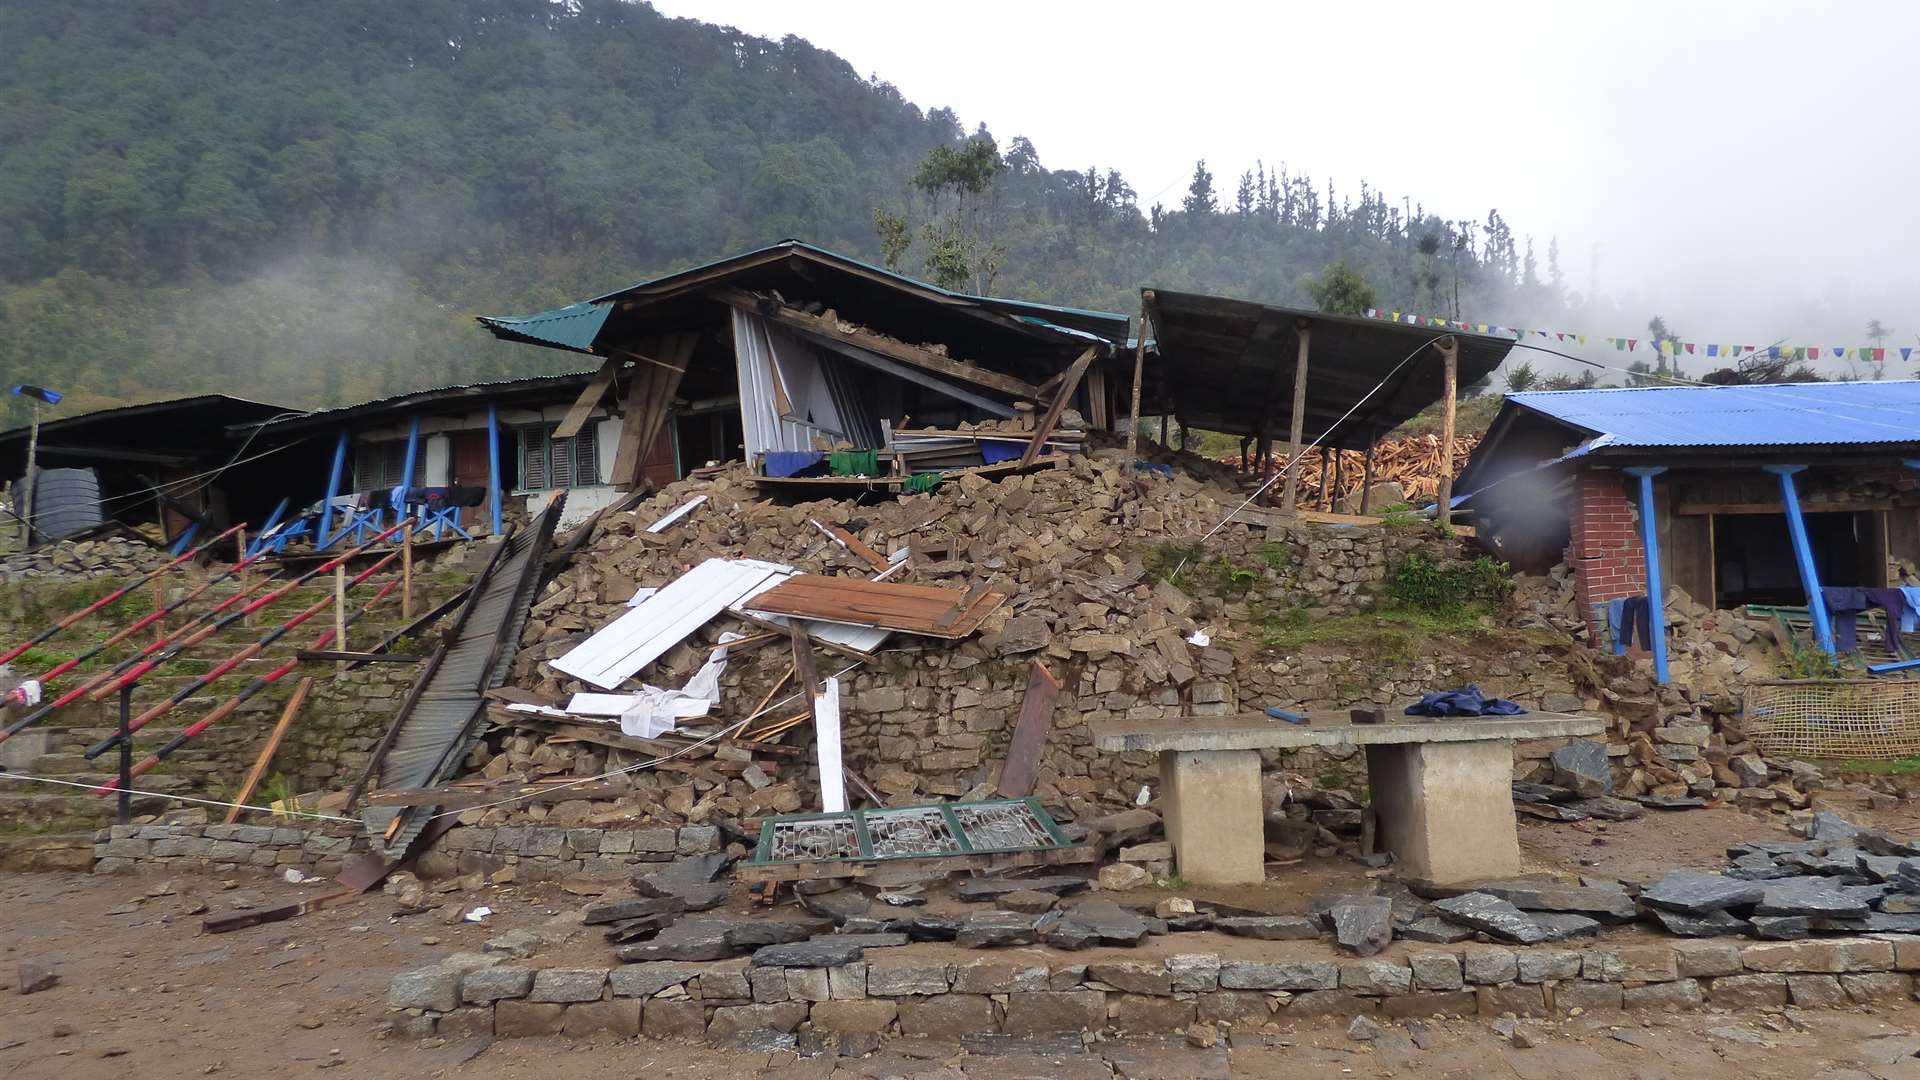 The earthquake has caused widespread destruction. Image from Corin Hardcastle